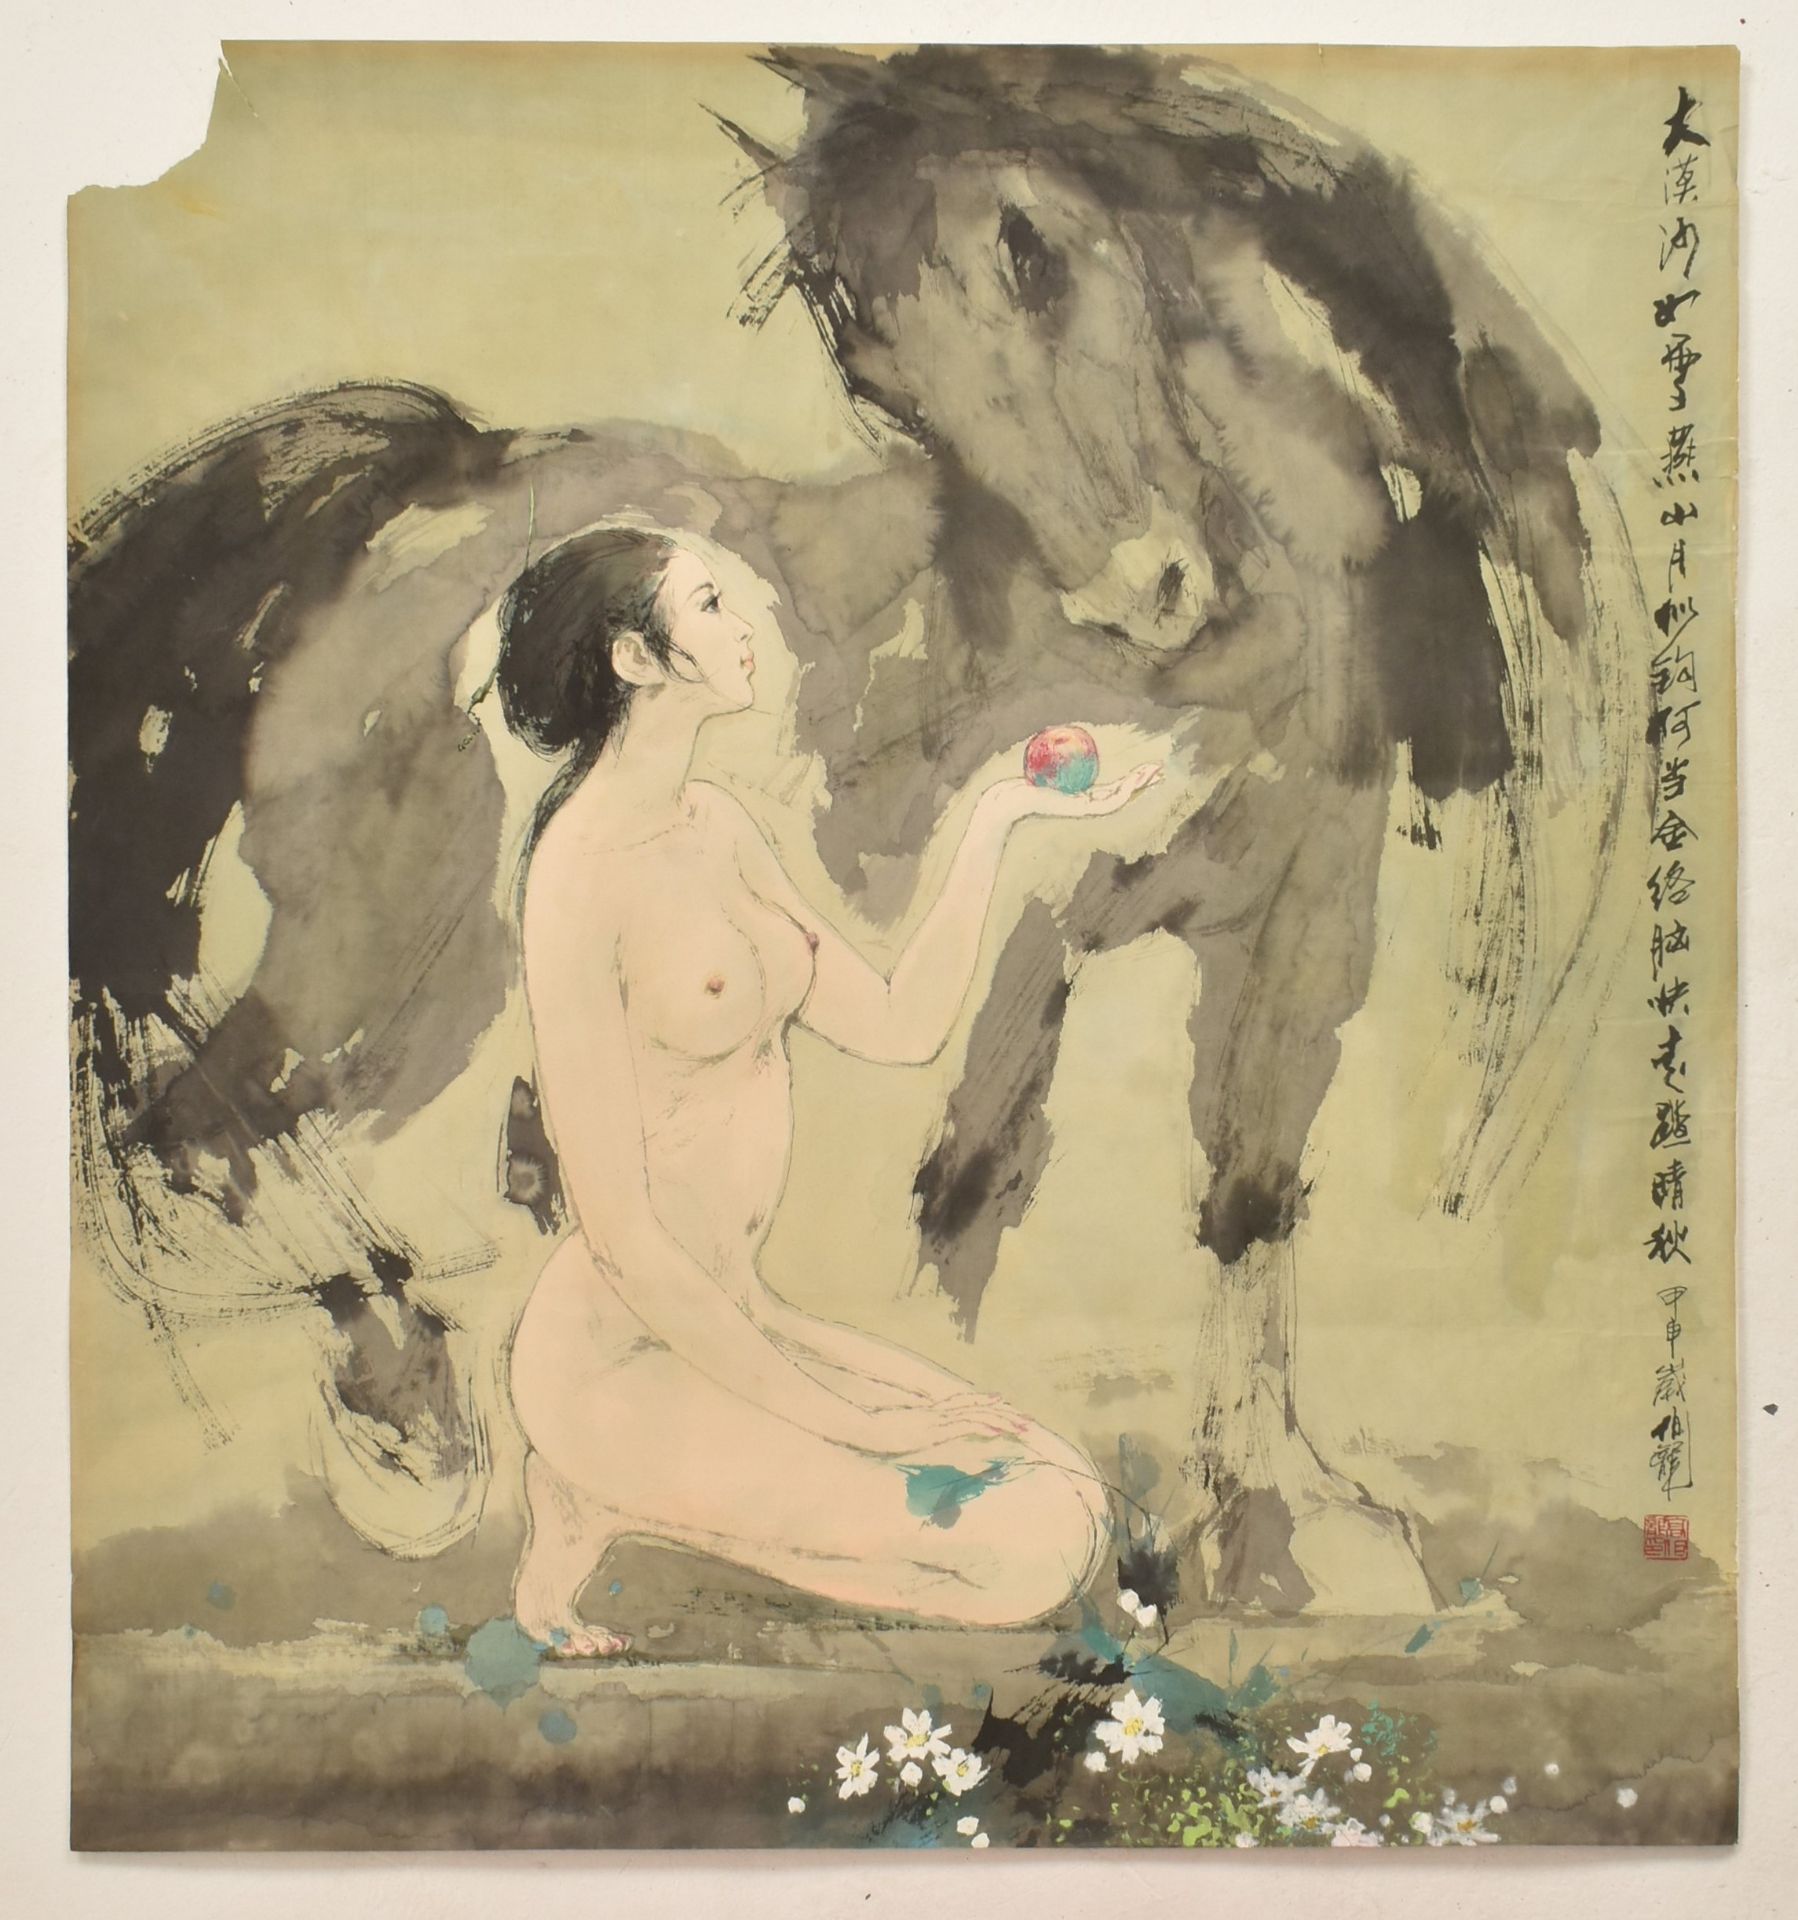 GAO BOLONG 高伯龙 - NUDE AND A HORSE 少女和马 - Image 2 of 6